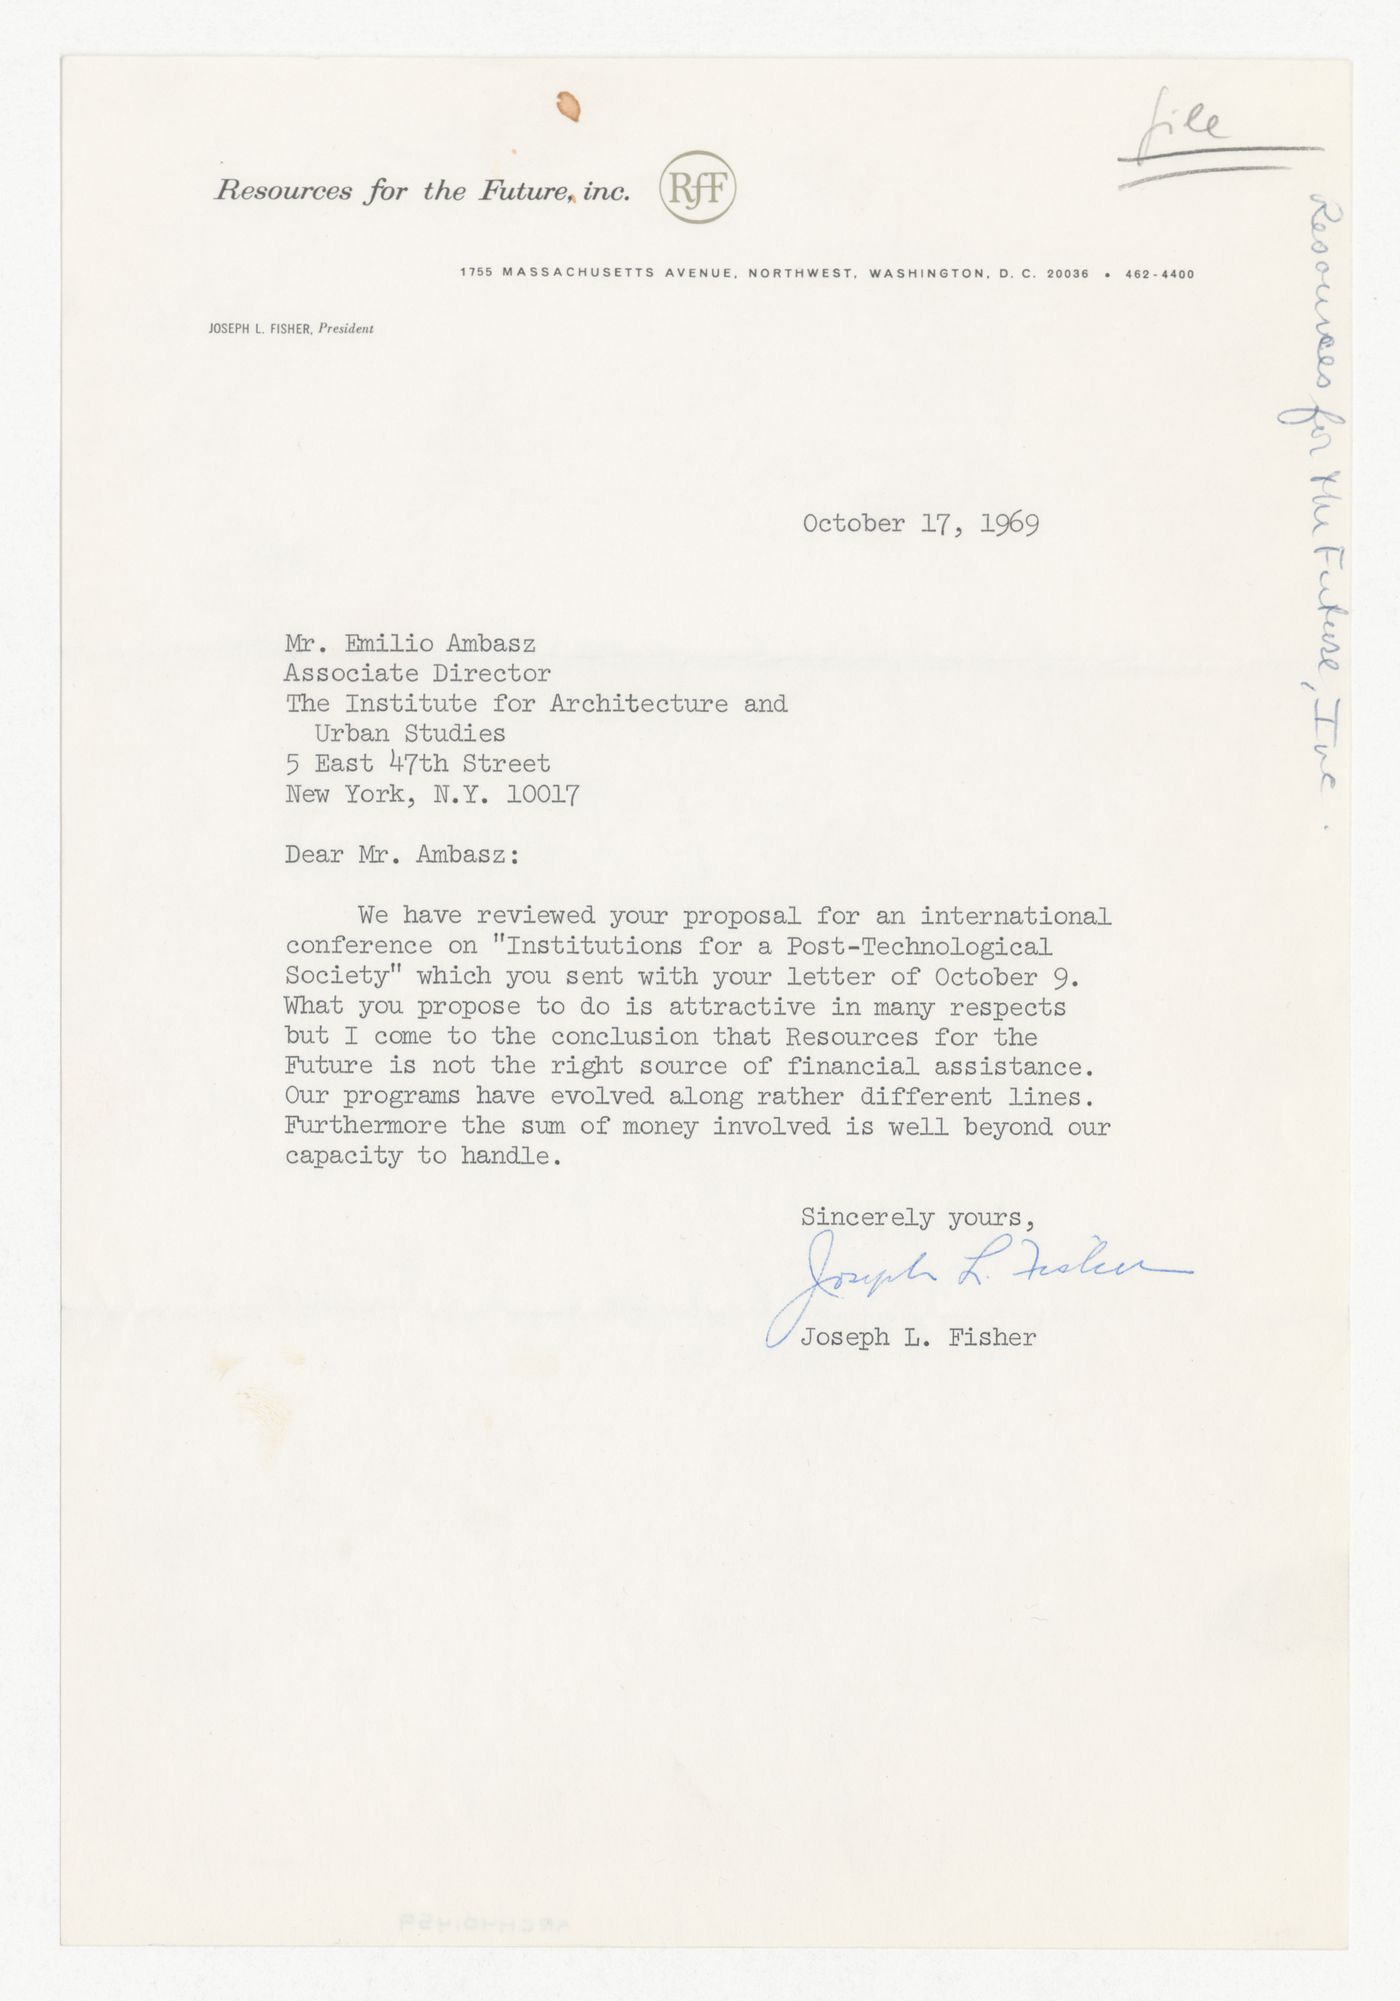 Letter from Joseph L. Fisher to Emilio Ambasz responding to proposal for Institutions for a Post-Technological Society conference